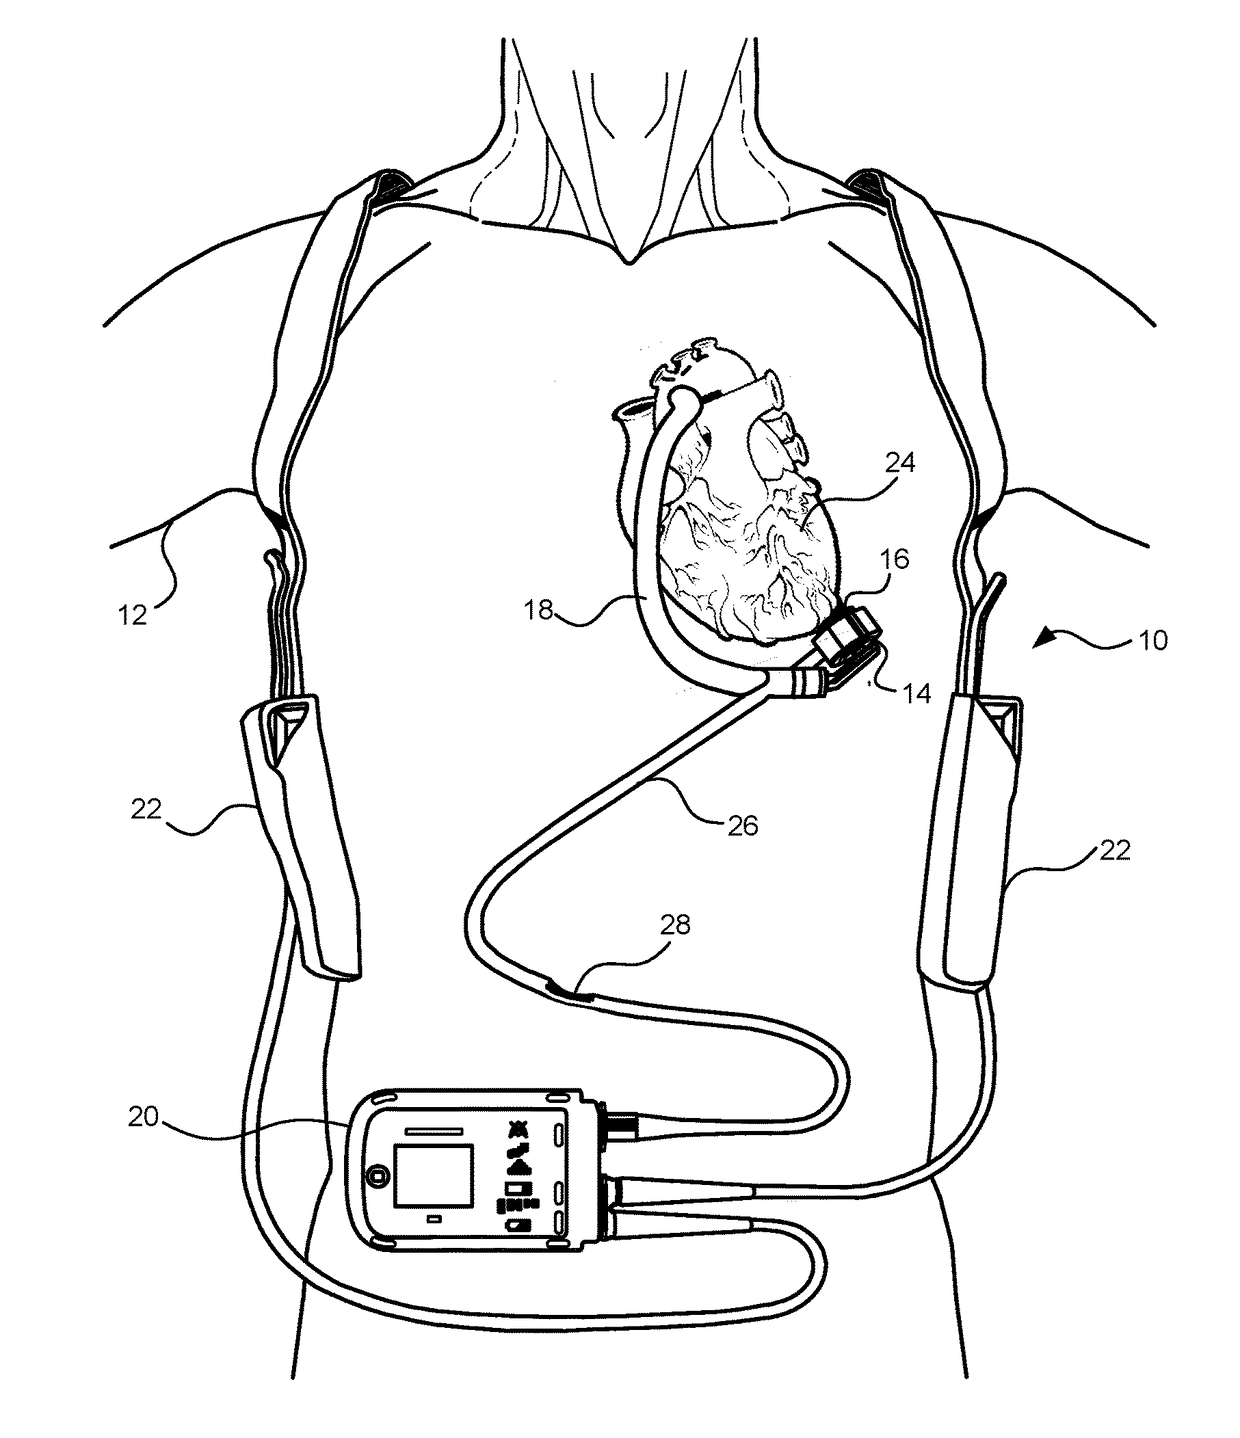 Methods for LVAD operation during communication losses